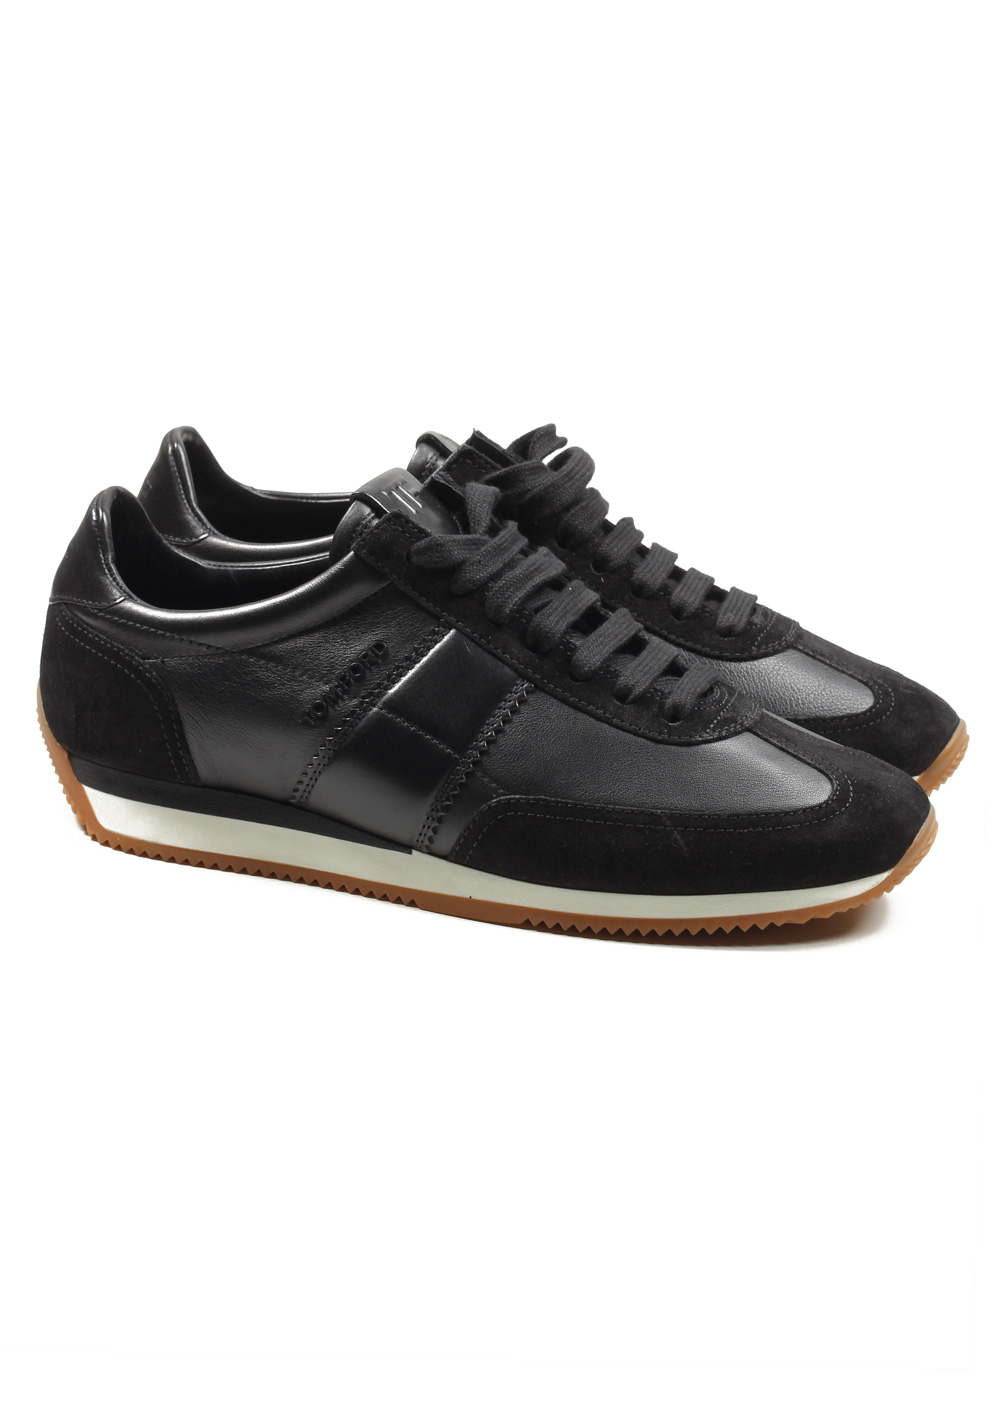 TOM FORD Orford Colorblock Suede Black Trainer Sneaker Shoes Size